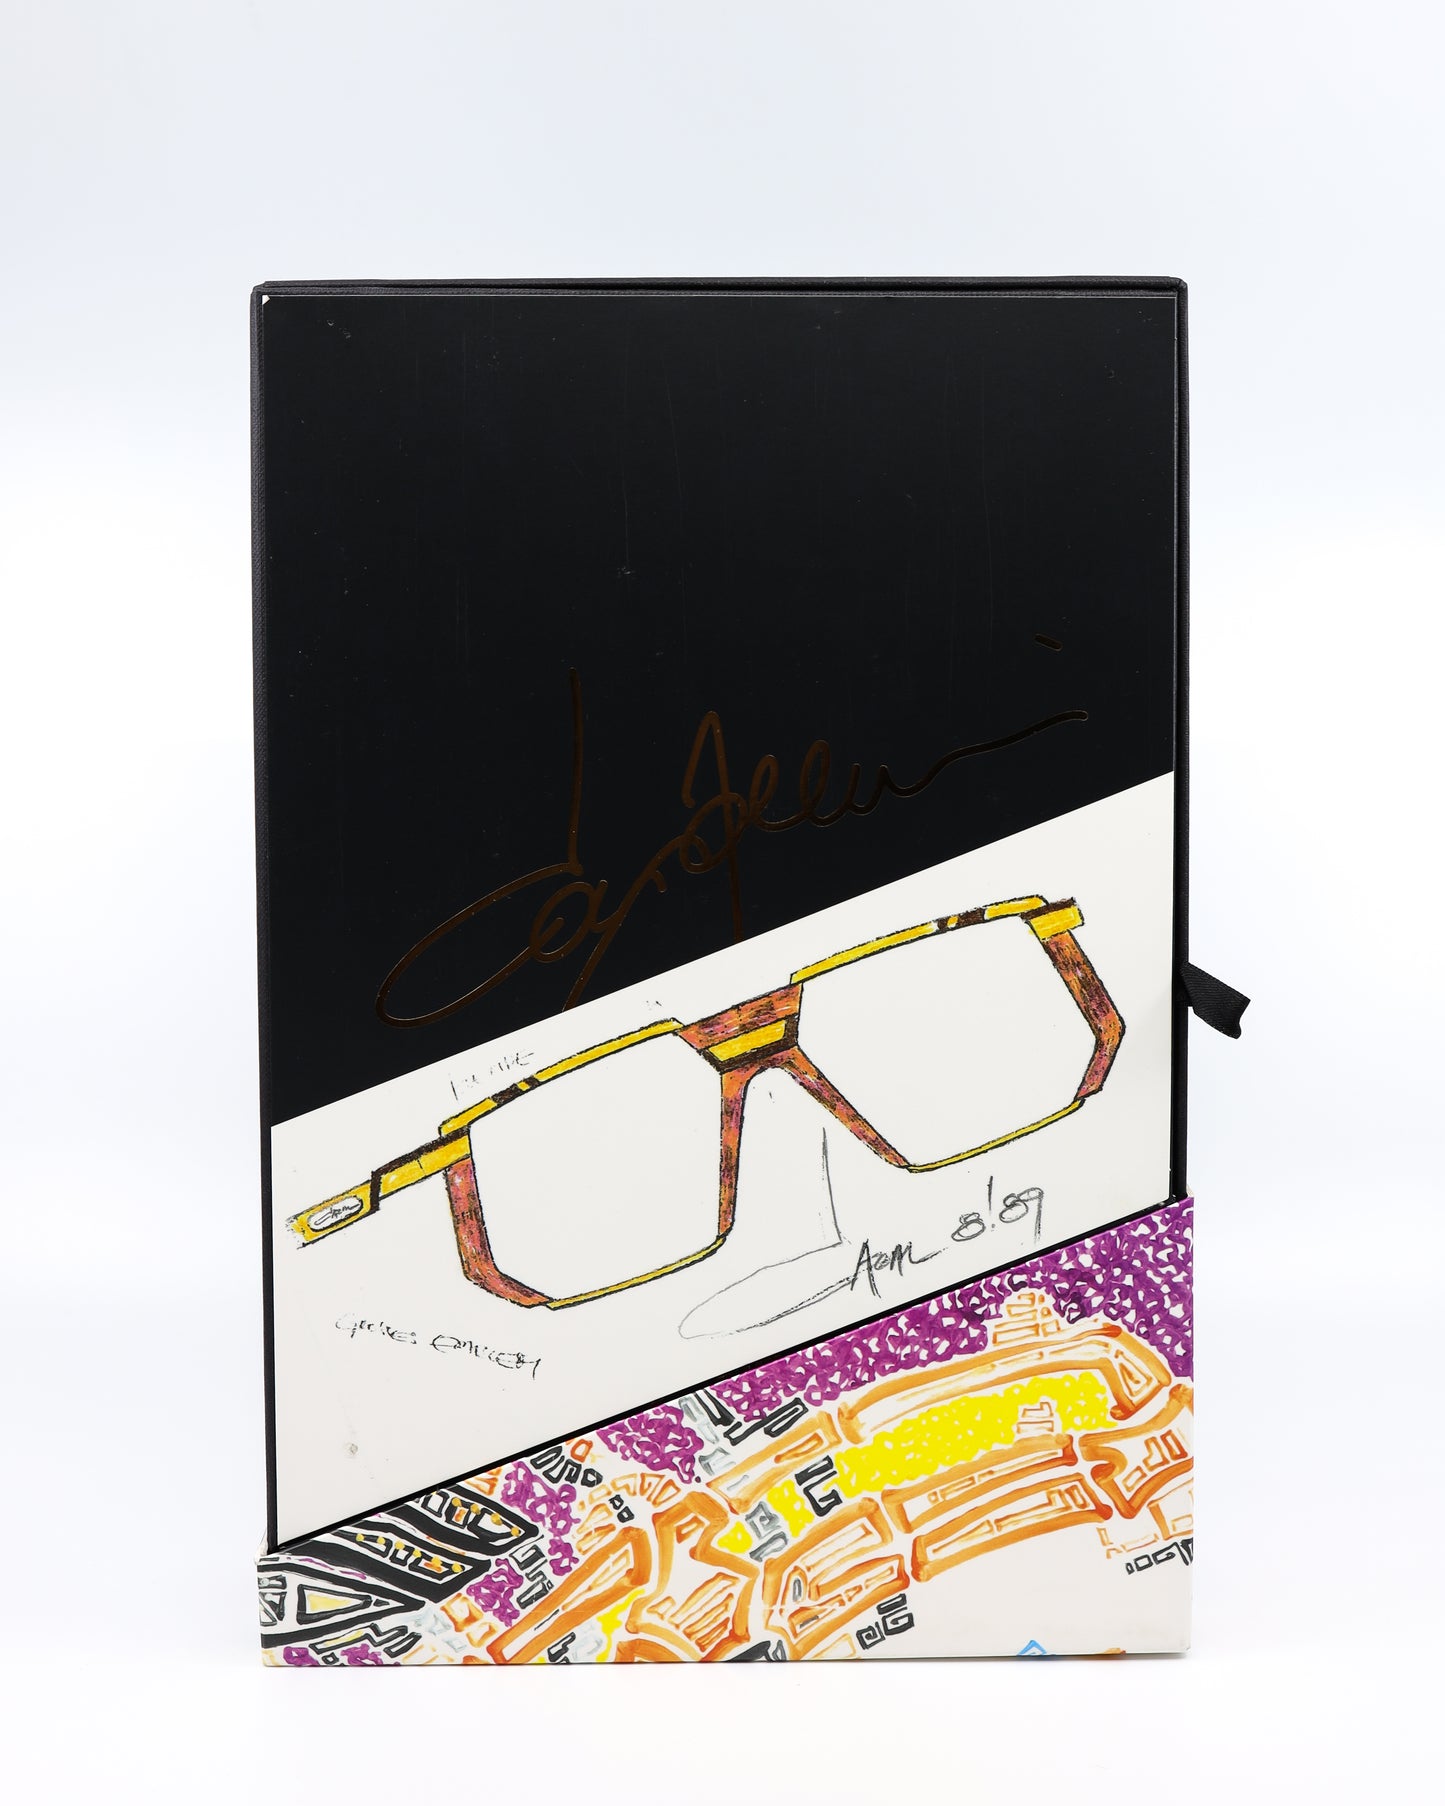 CAZAL LEGENDS 001 COL. 002 LIMITED EDITION